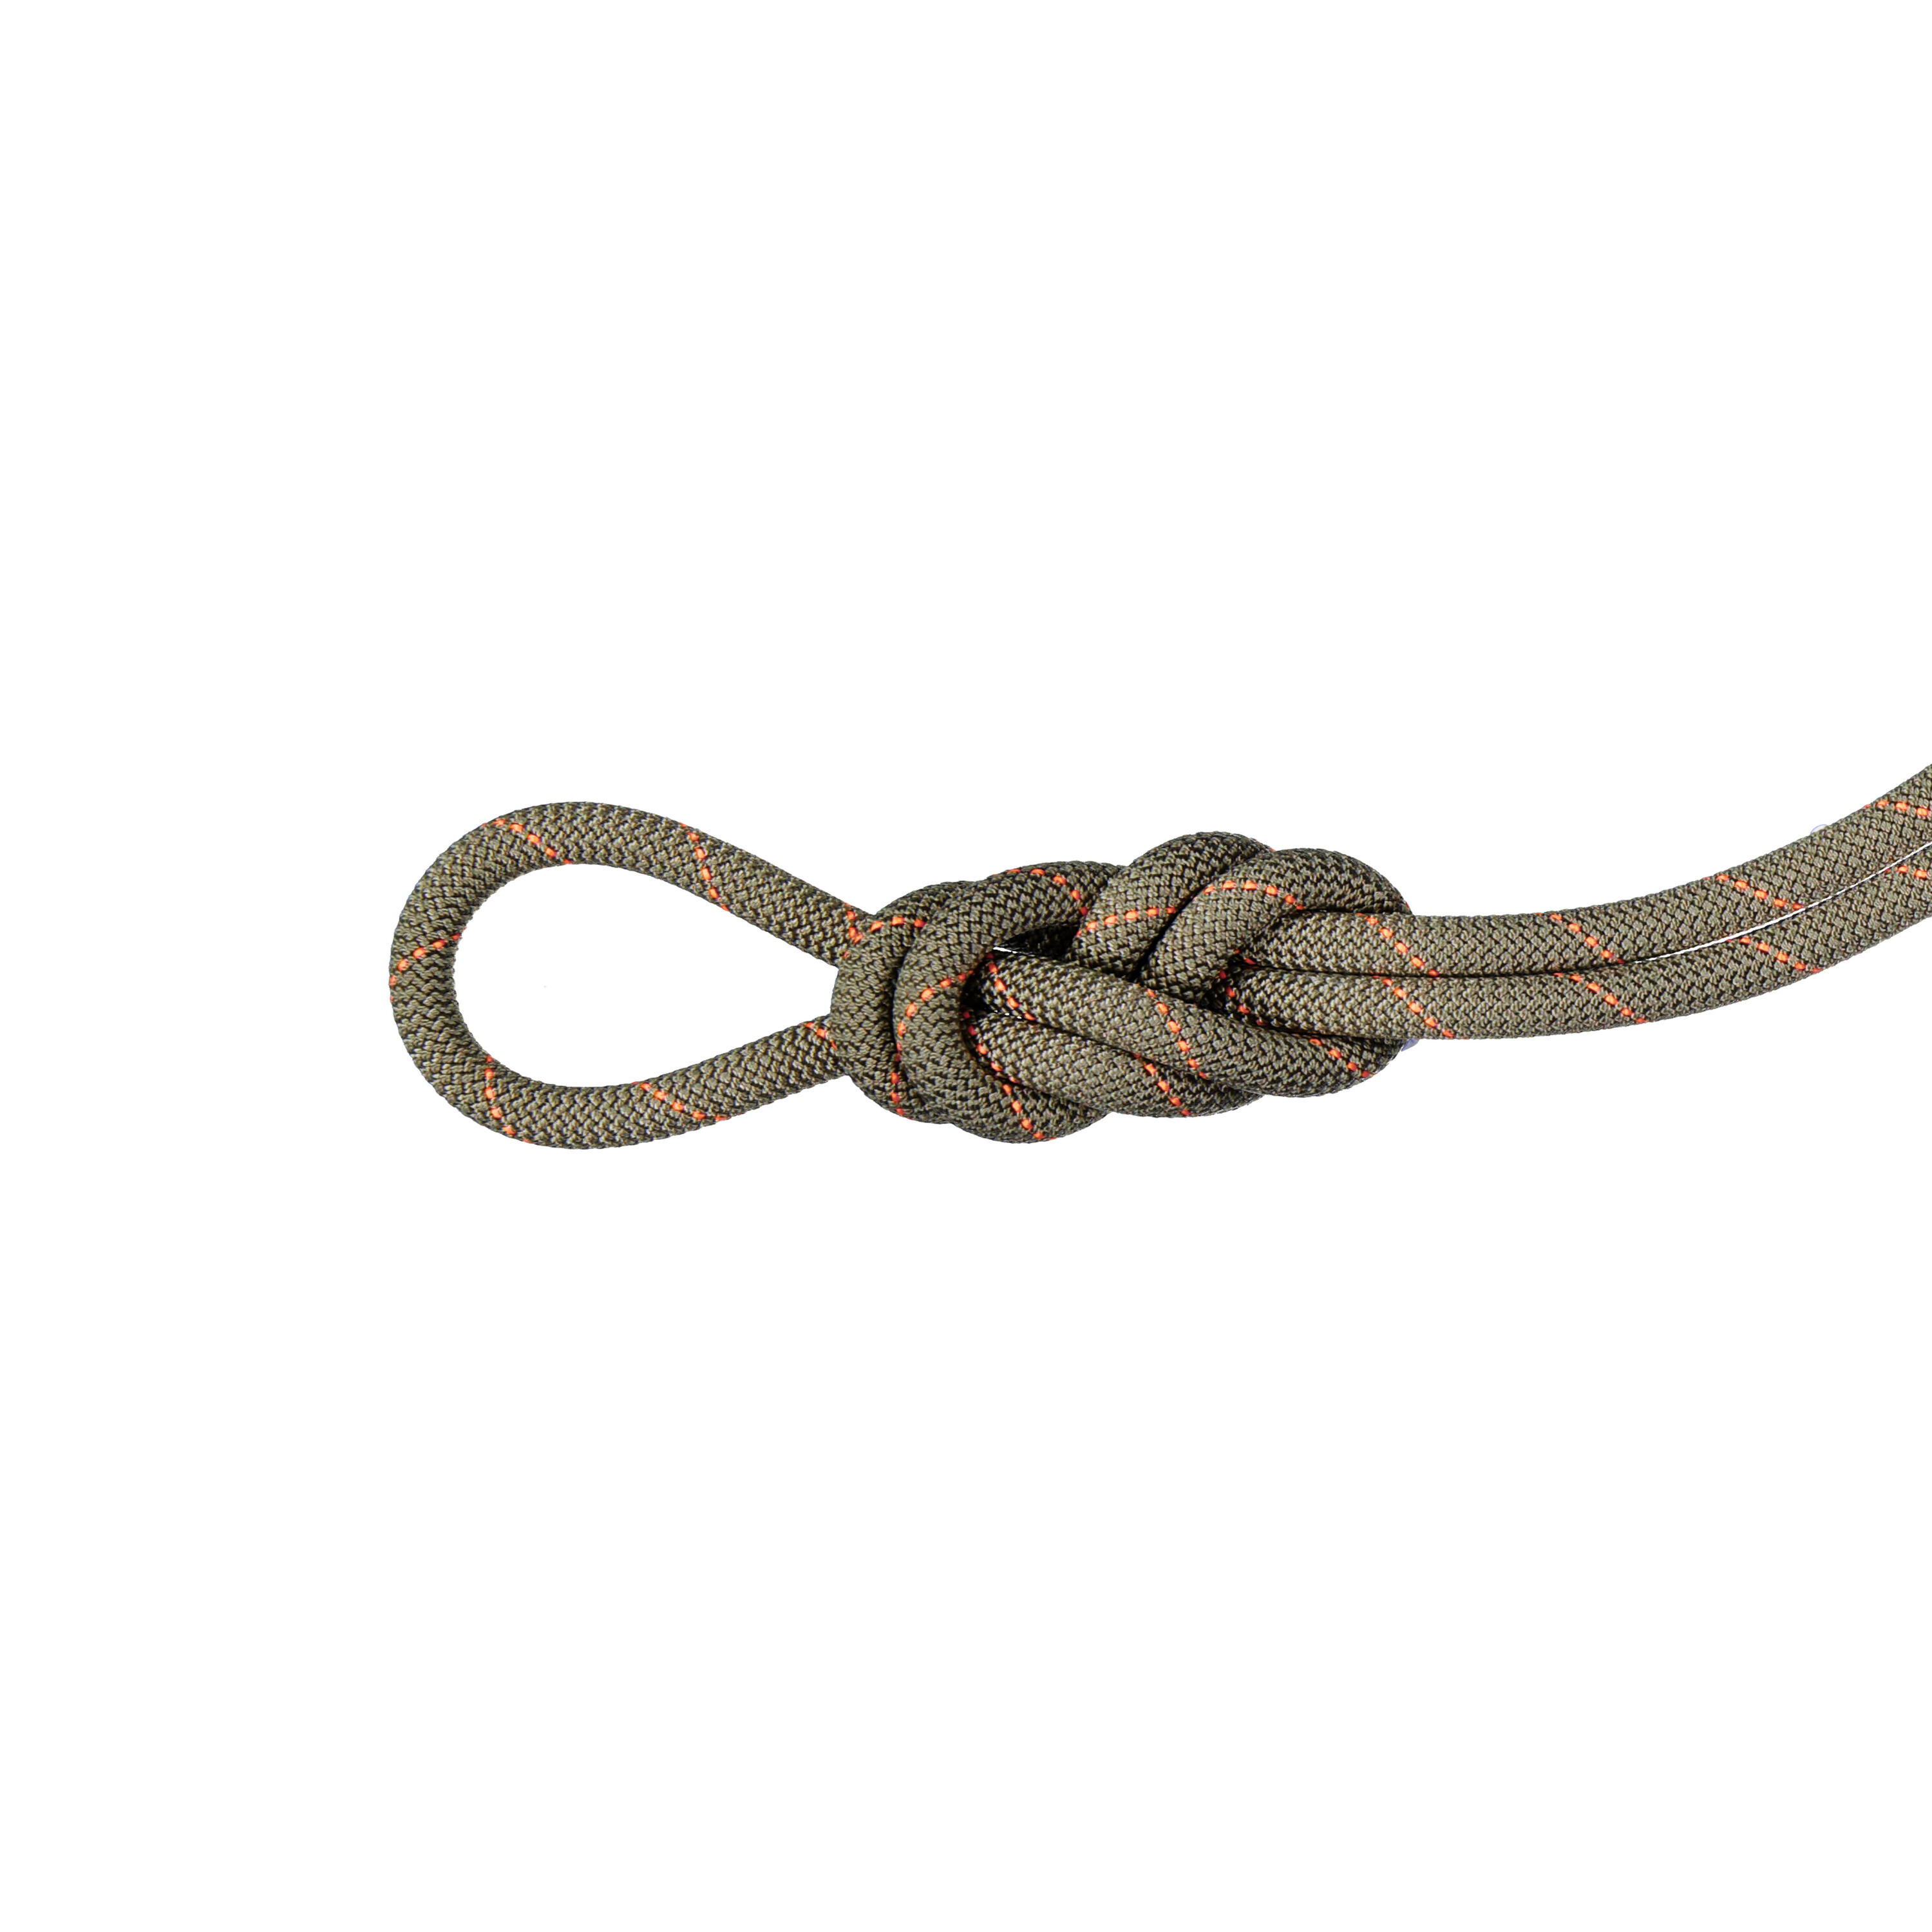 MAMMUT Gym Workhorse Classic Single Rope 9.9 mm x 40m - Olive